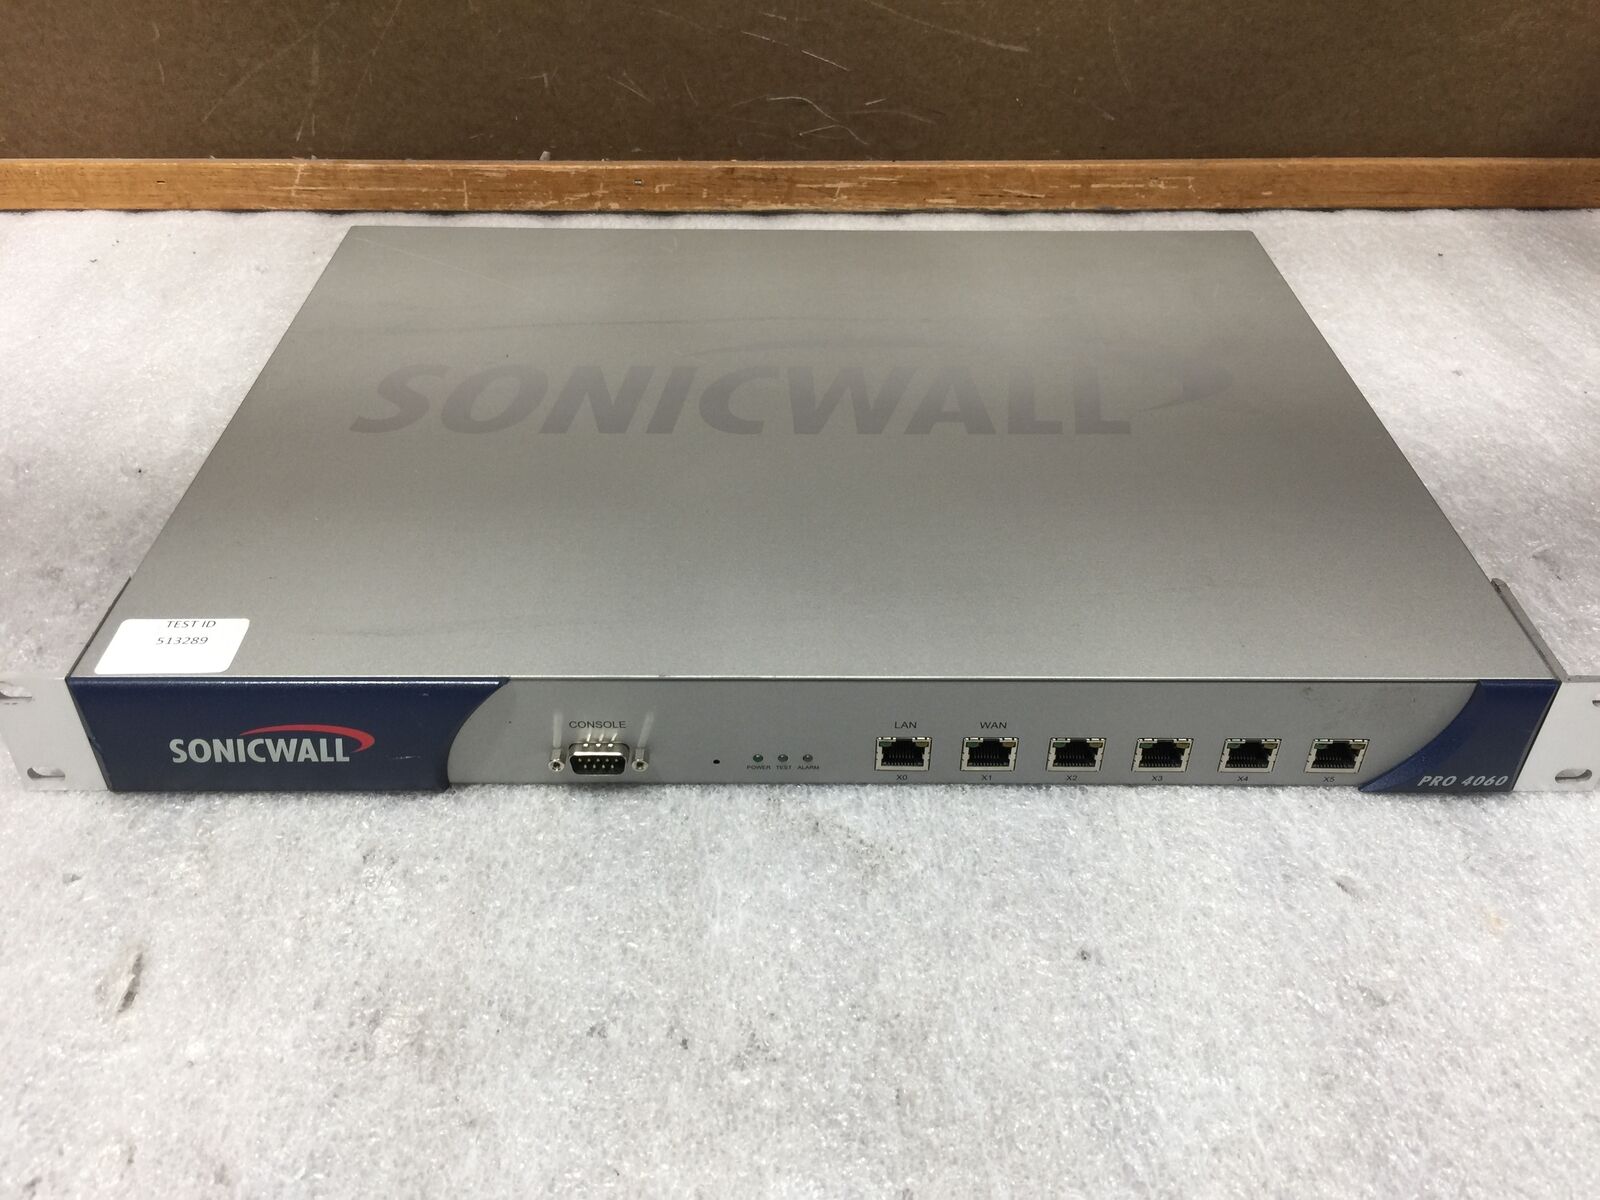 Sonicwall Pro 4060 Network Security Appliance w/Rack Ears Tested and Working